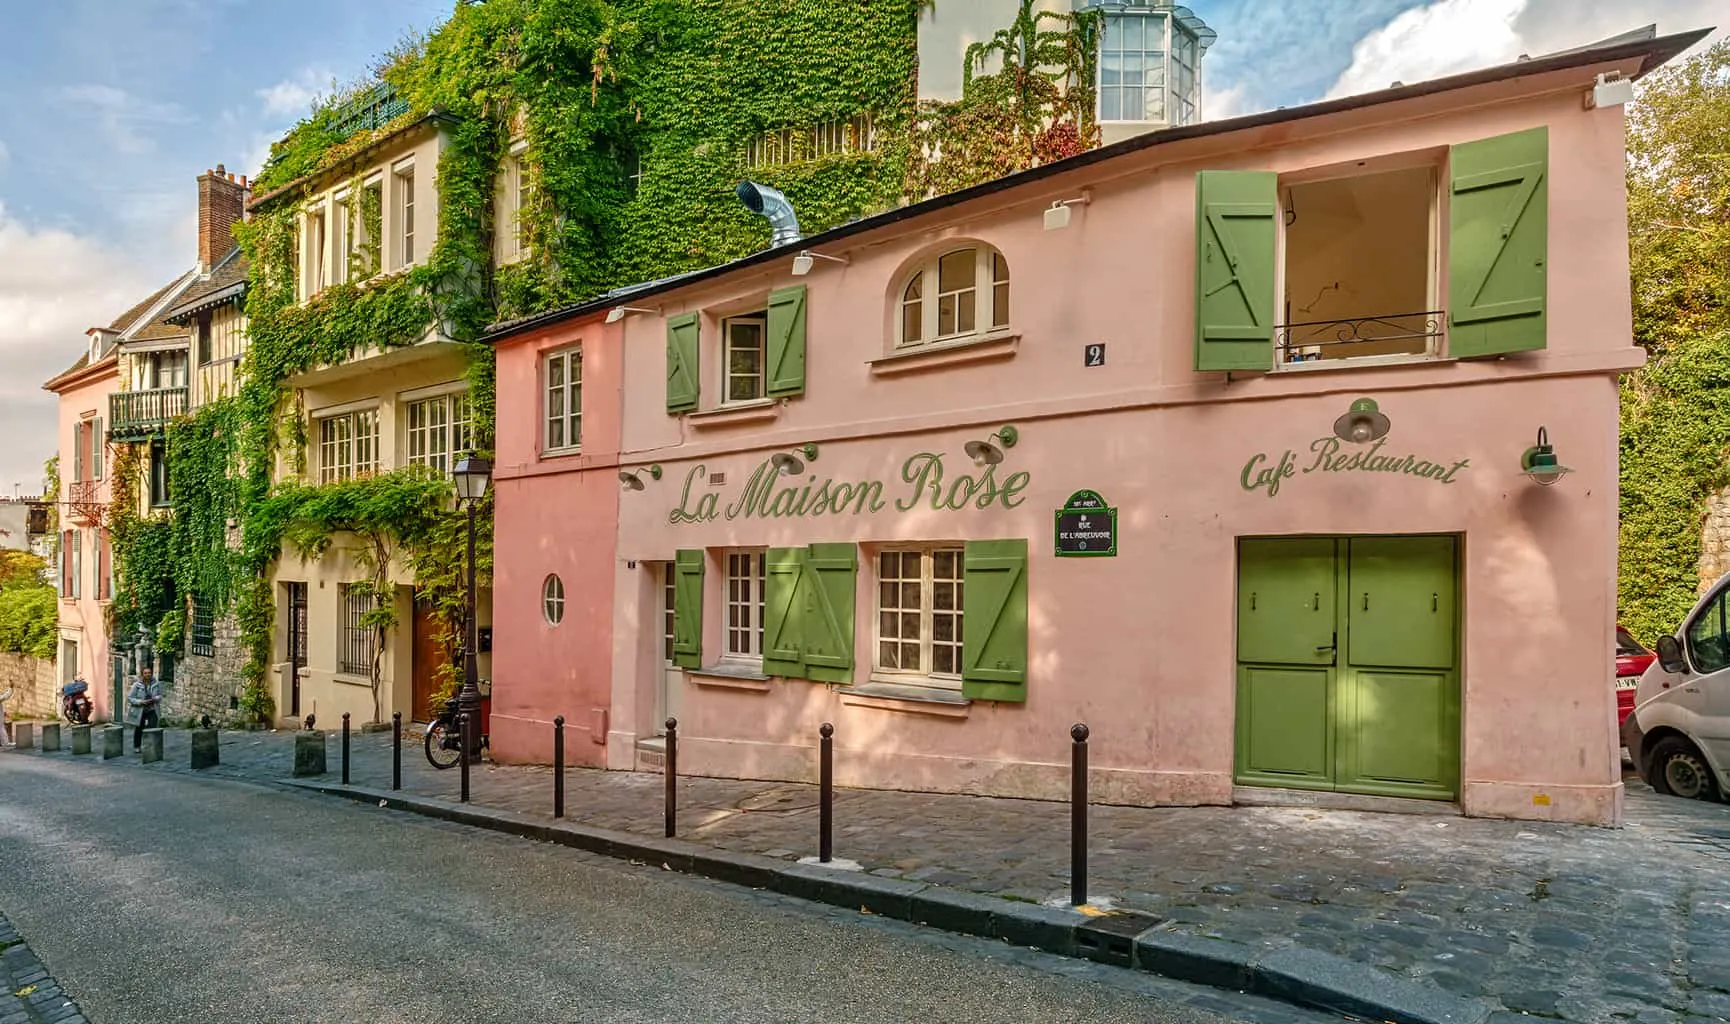 The beautiful, pale pink and lime green exterior of La Maison Rose in Montmartre, Paris.